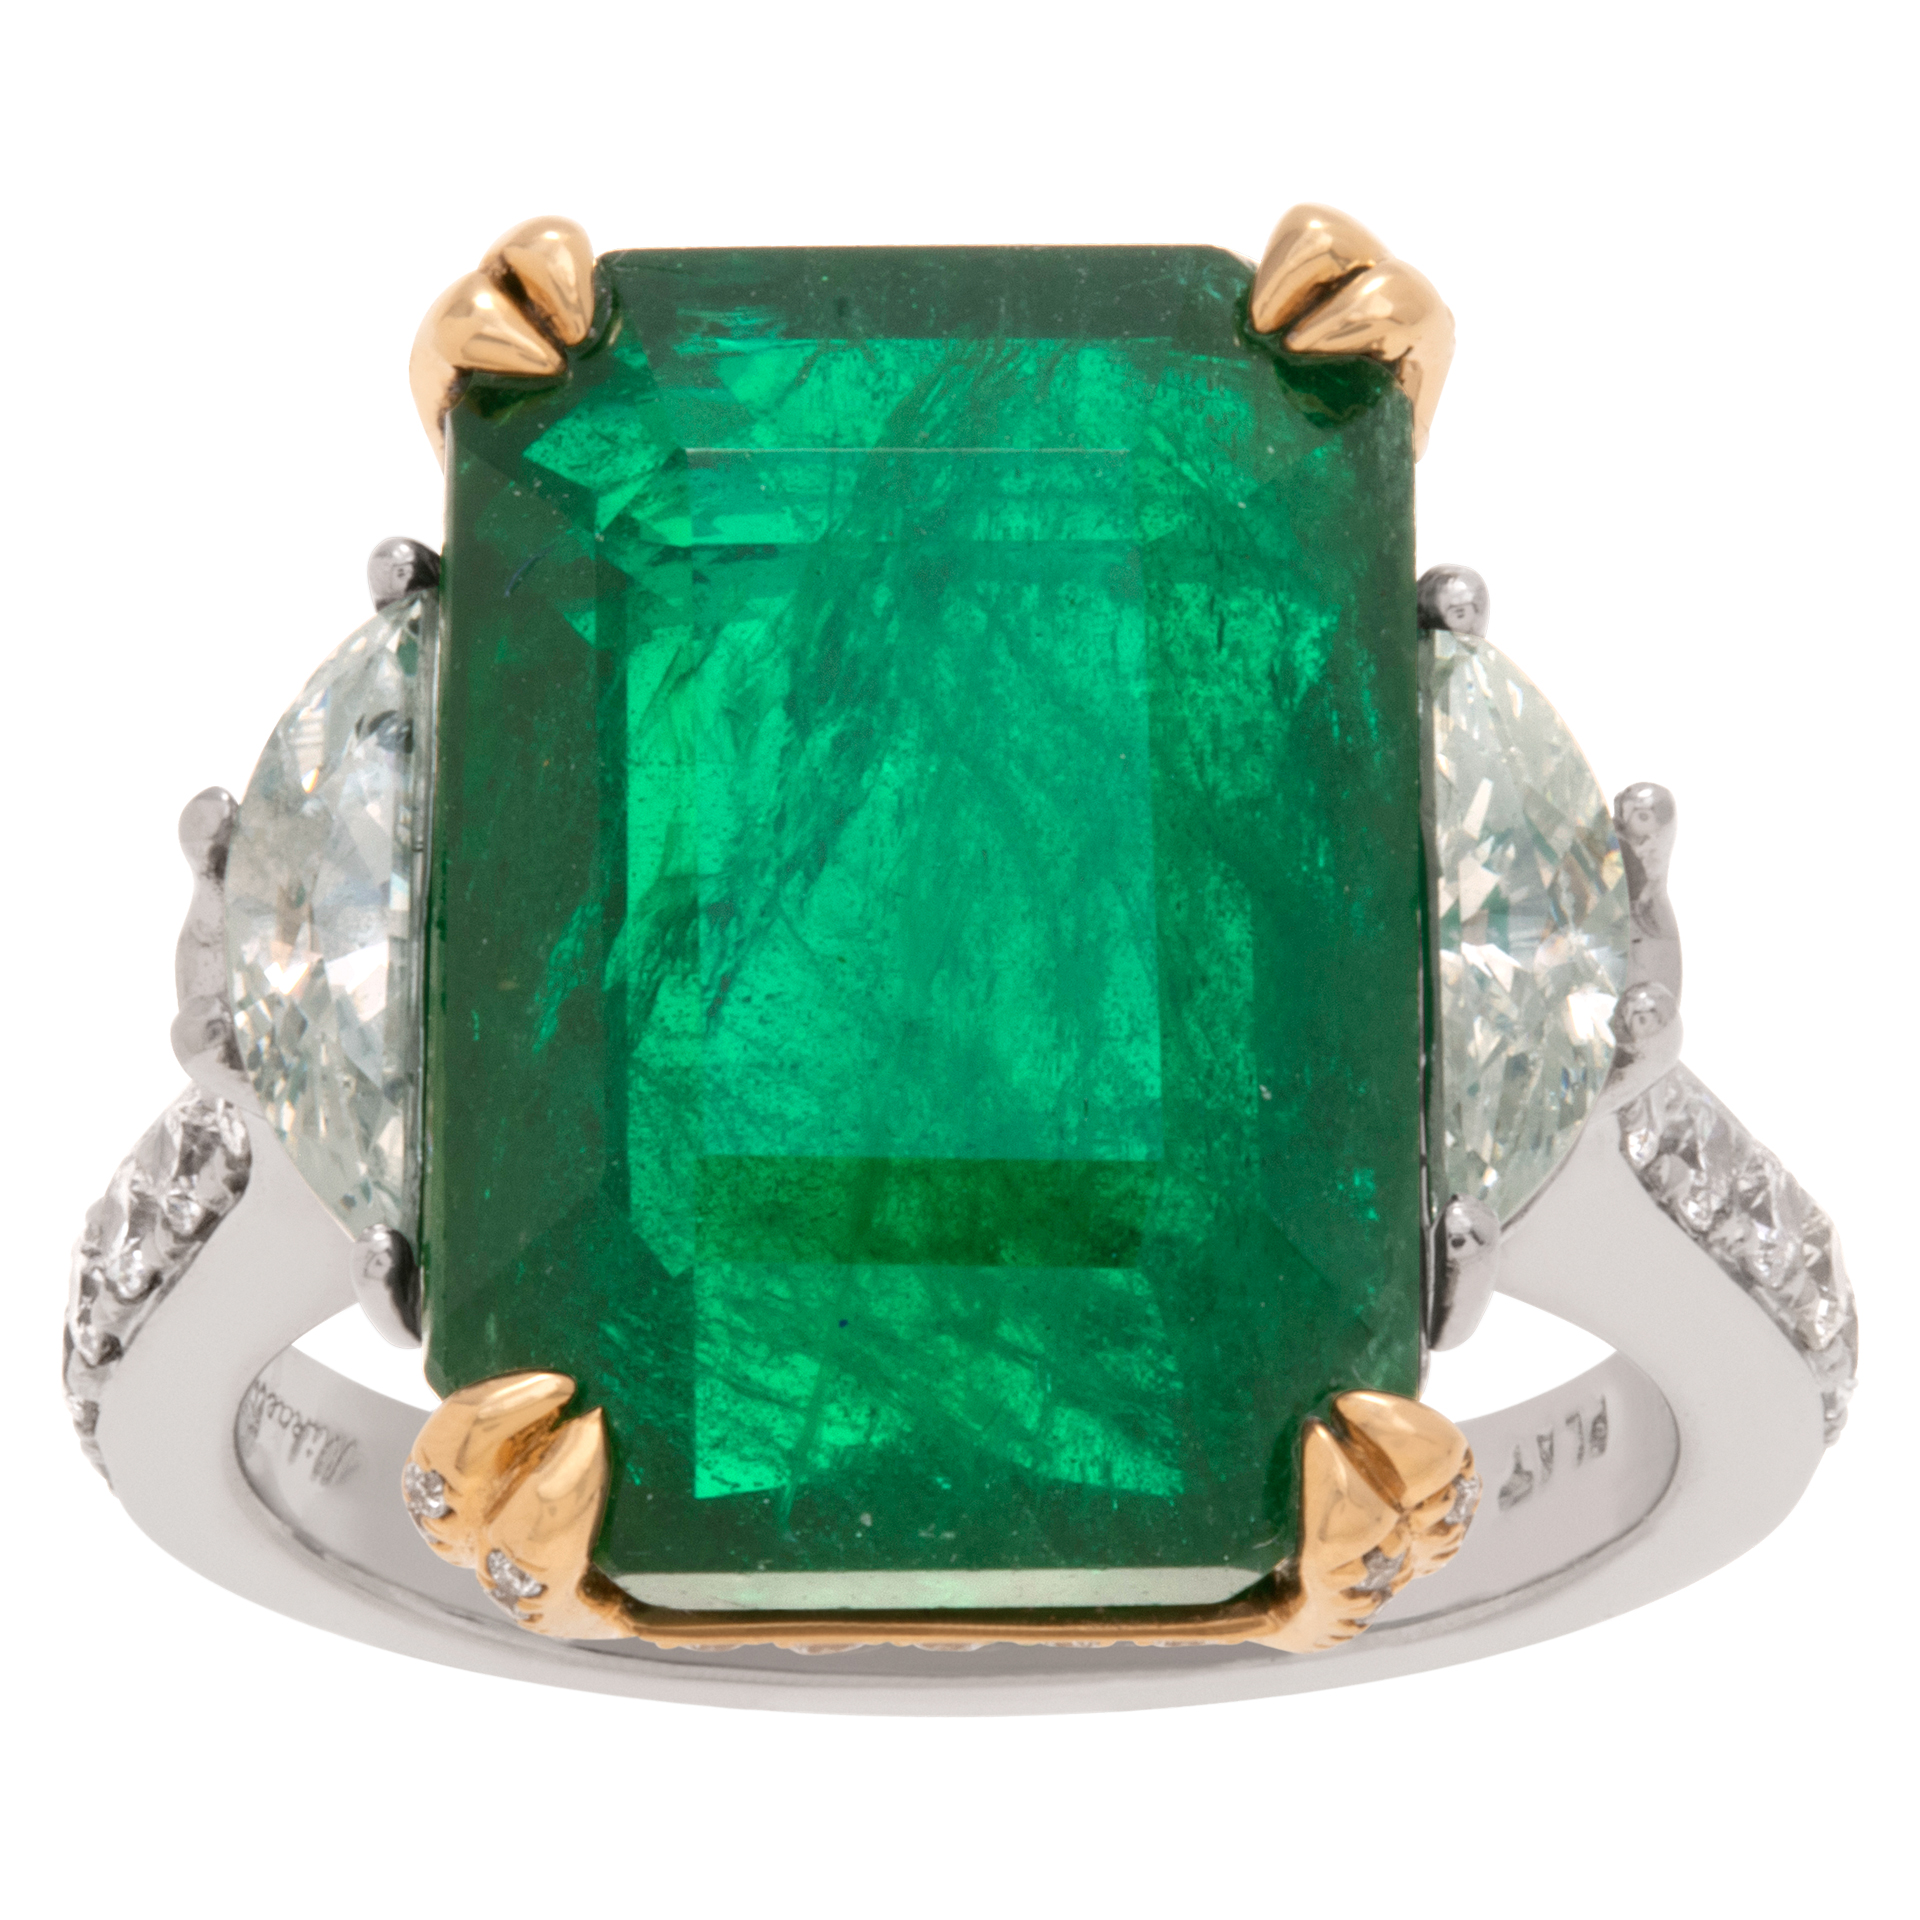 Emerald and diamond ring in platinum and 18k yellow gold